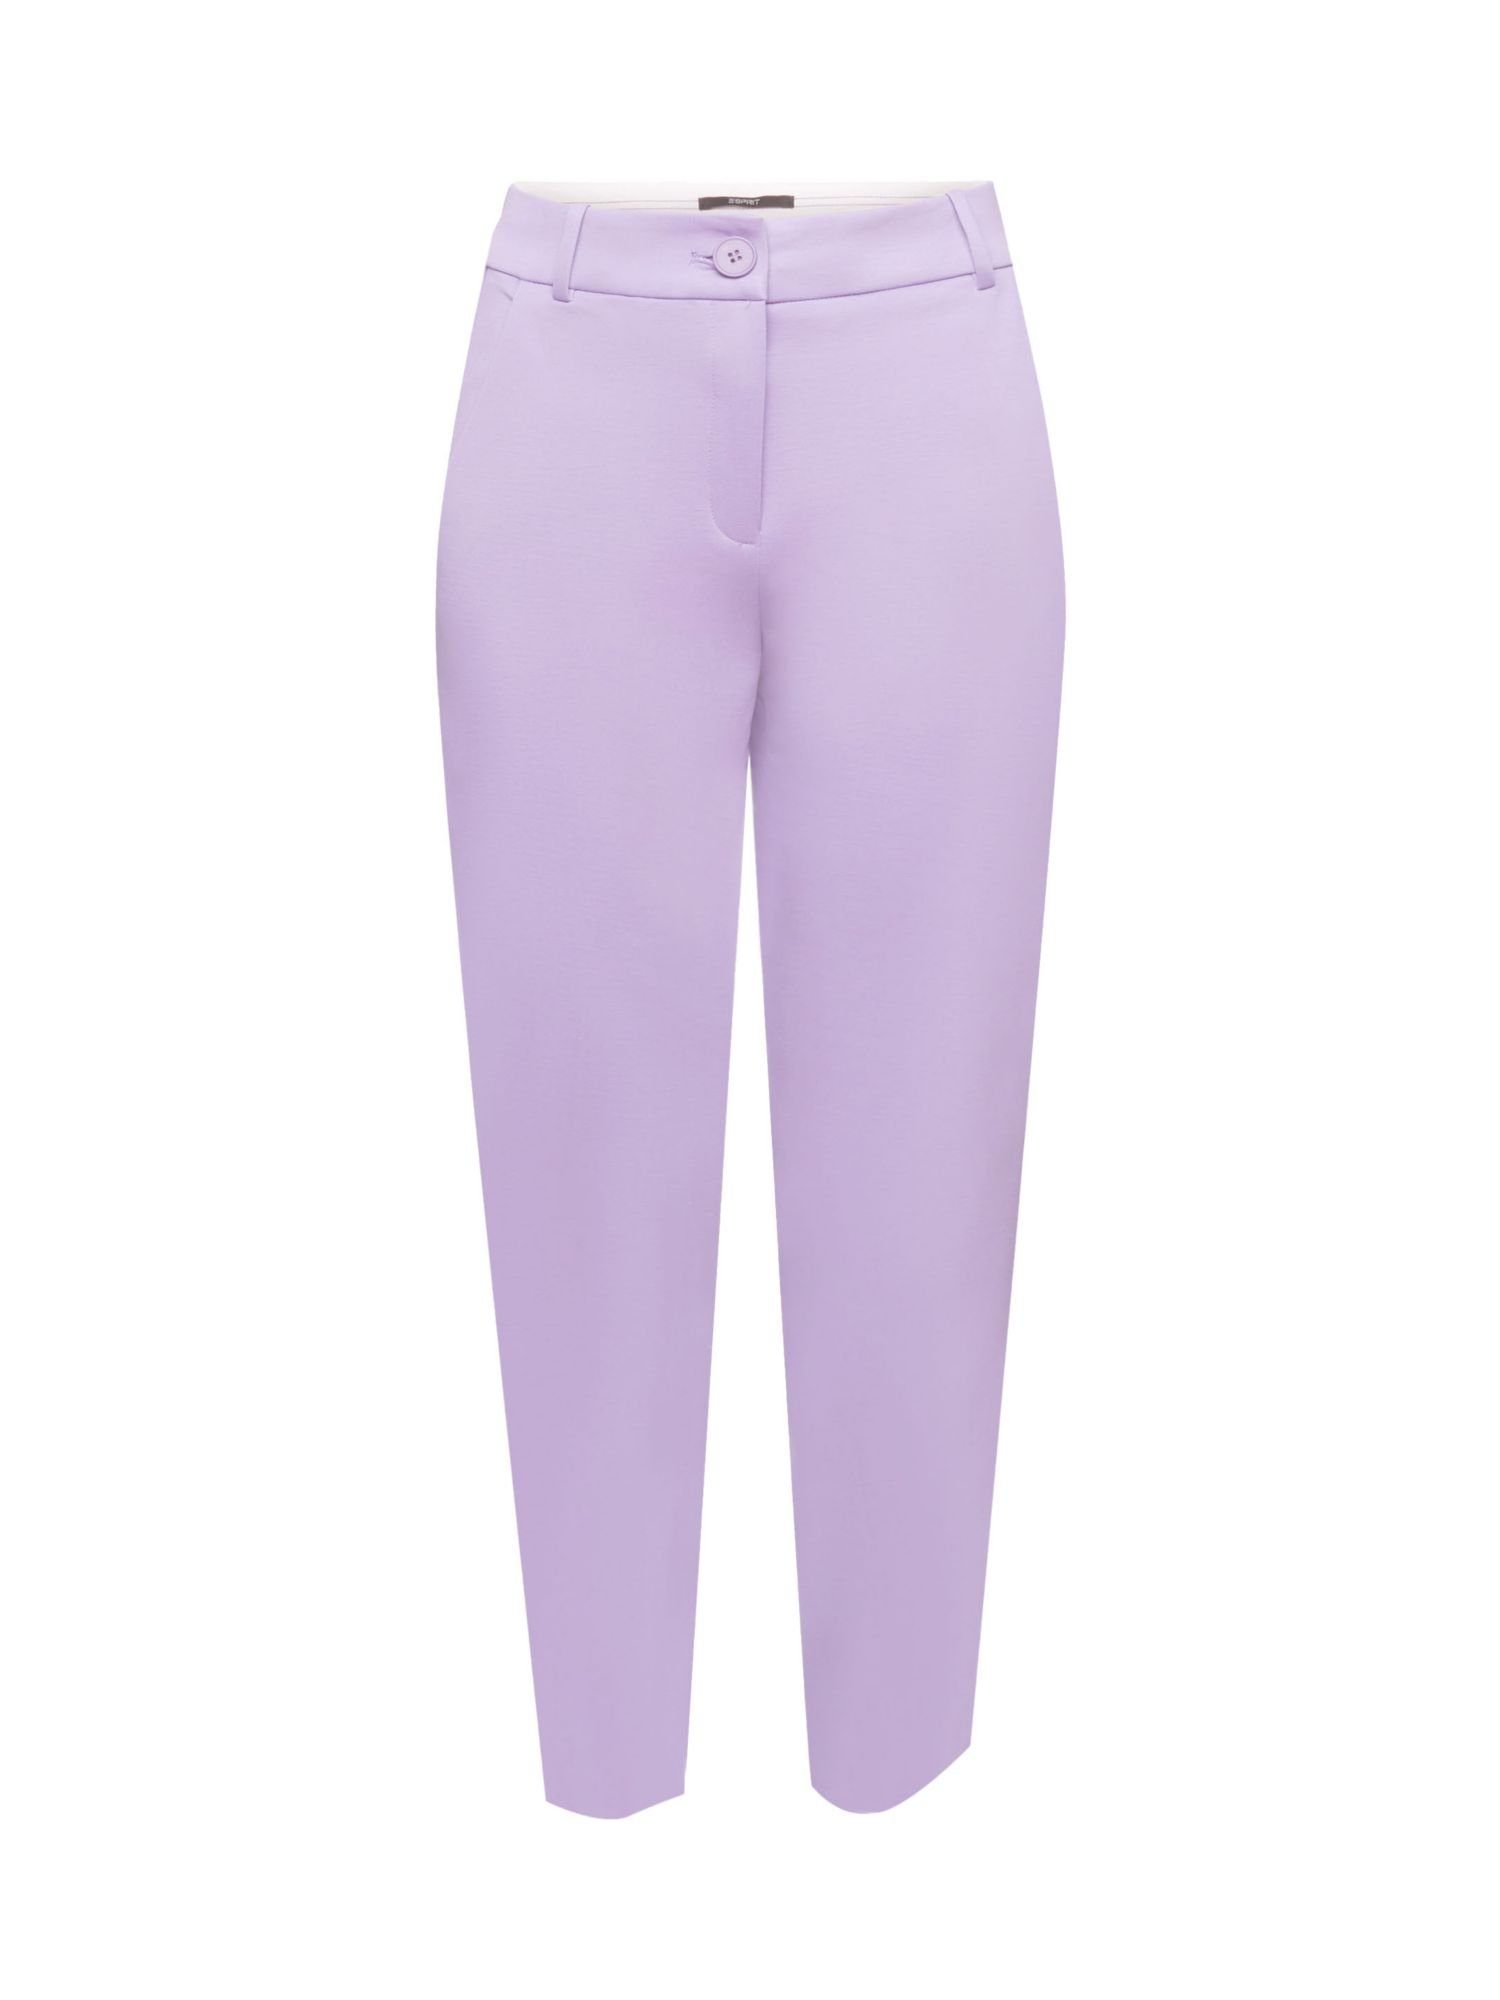 Stretch-Hose Mix SPORTY PUNTO Collection LAVENDER Pants Tapered & Esprit Match